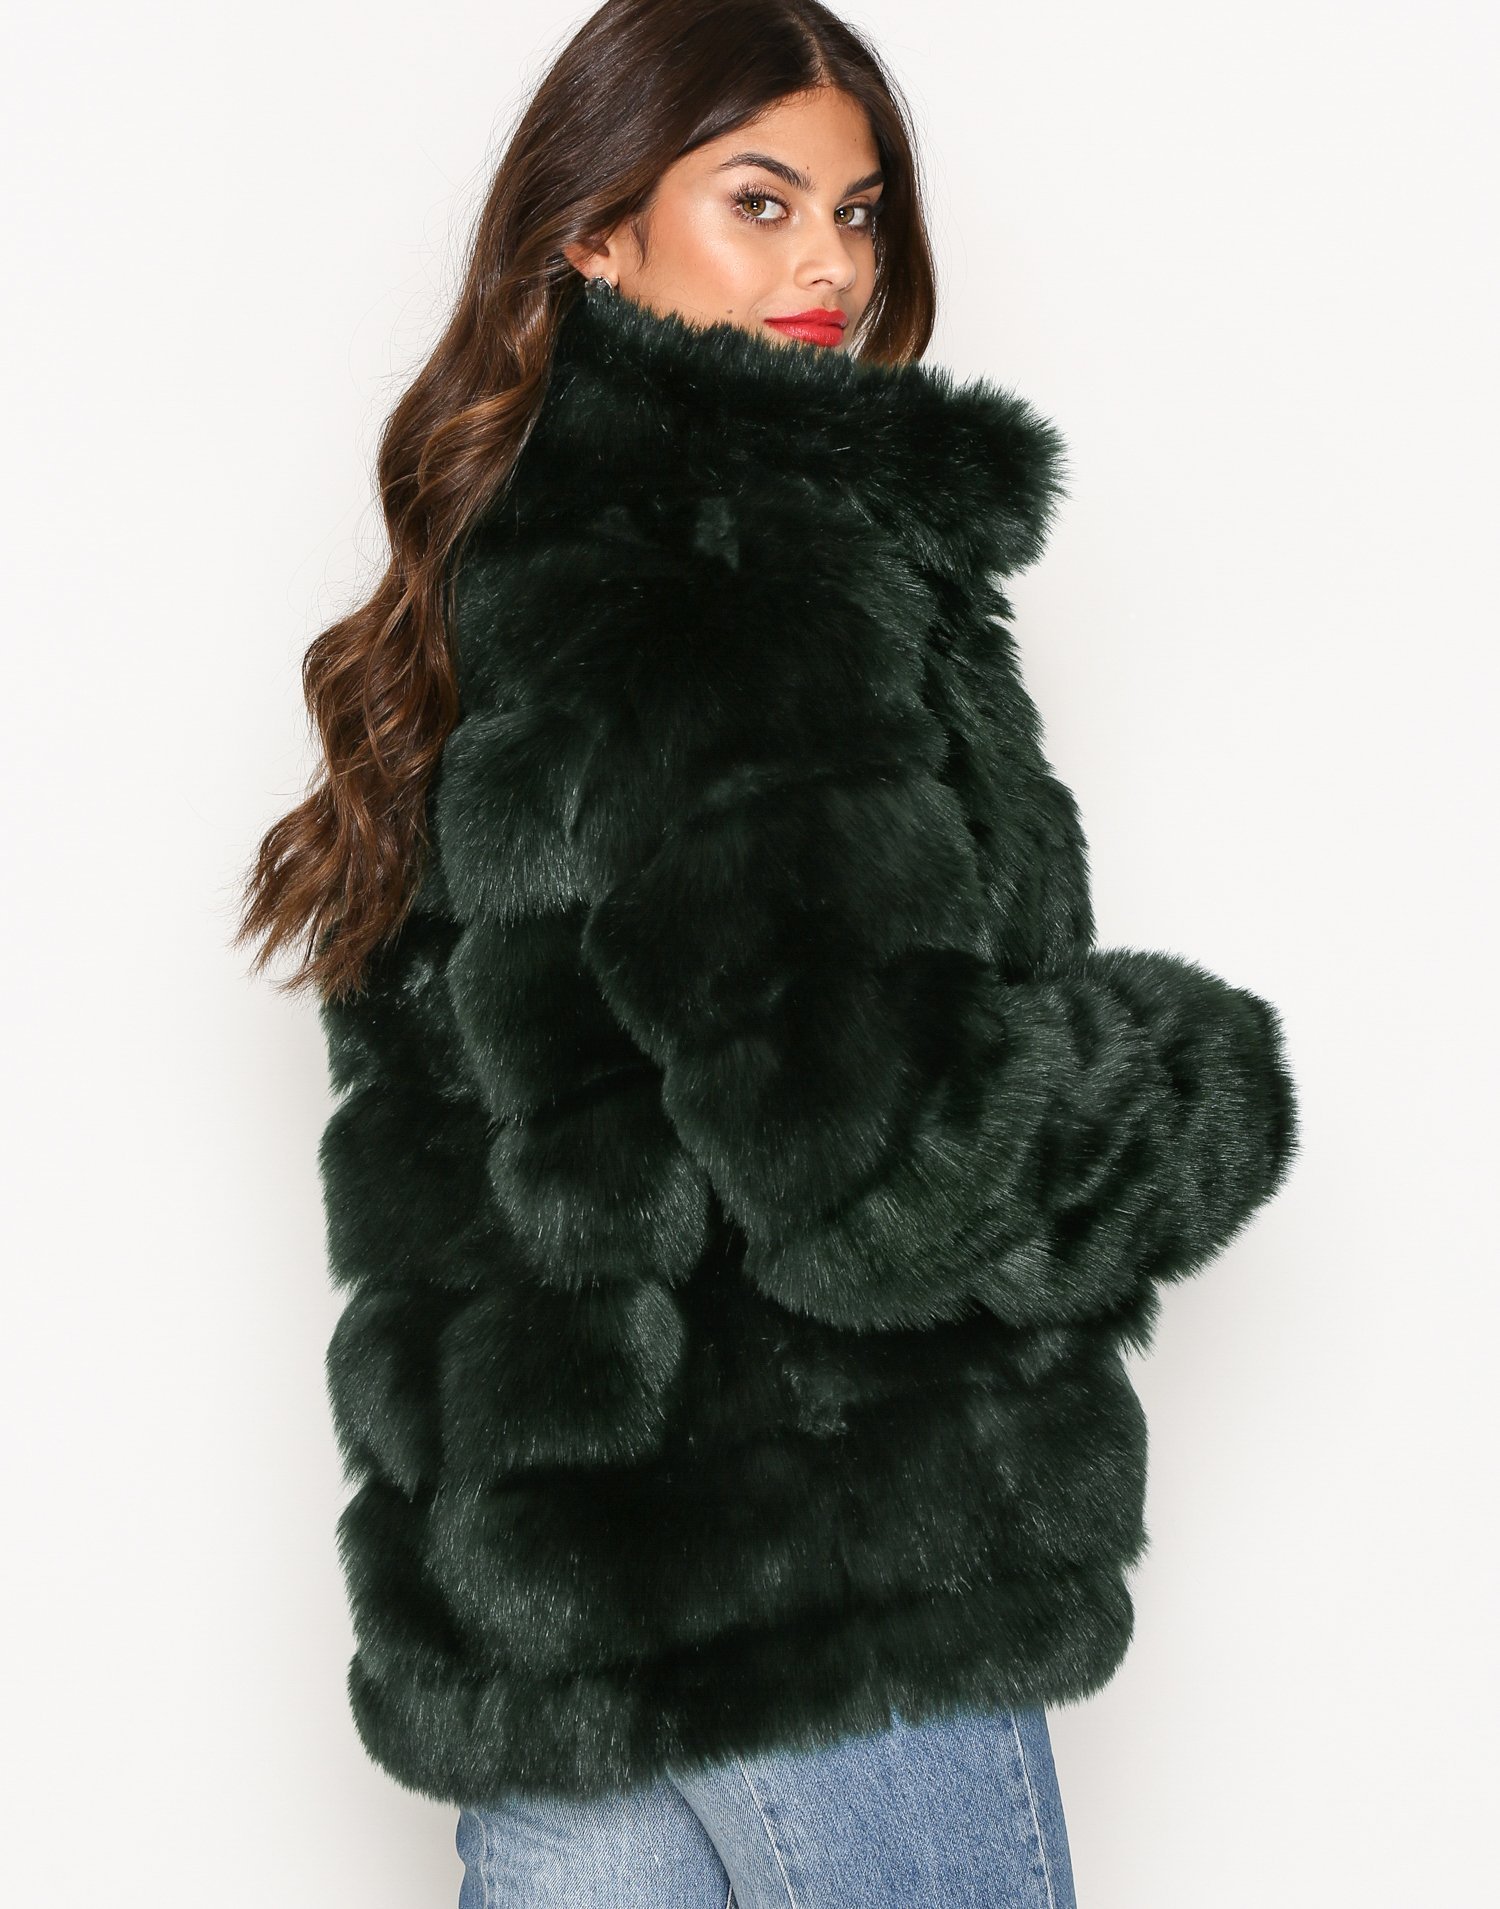 Puffy Fur Coat - Nly Trend - Green - Jackets - Clothing - Women - Nelly.com